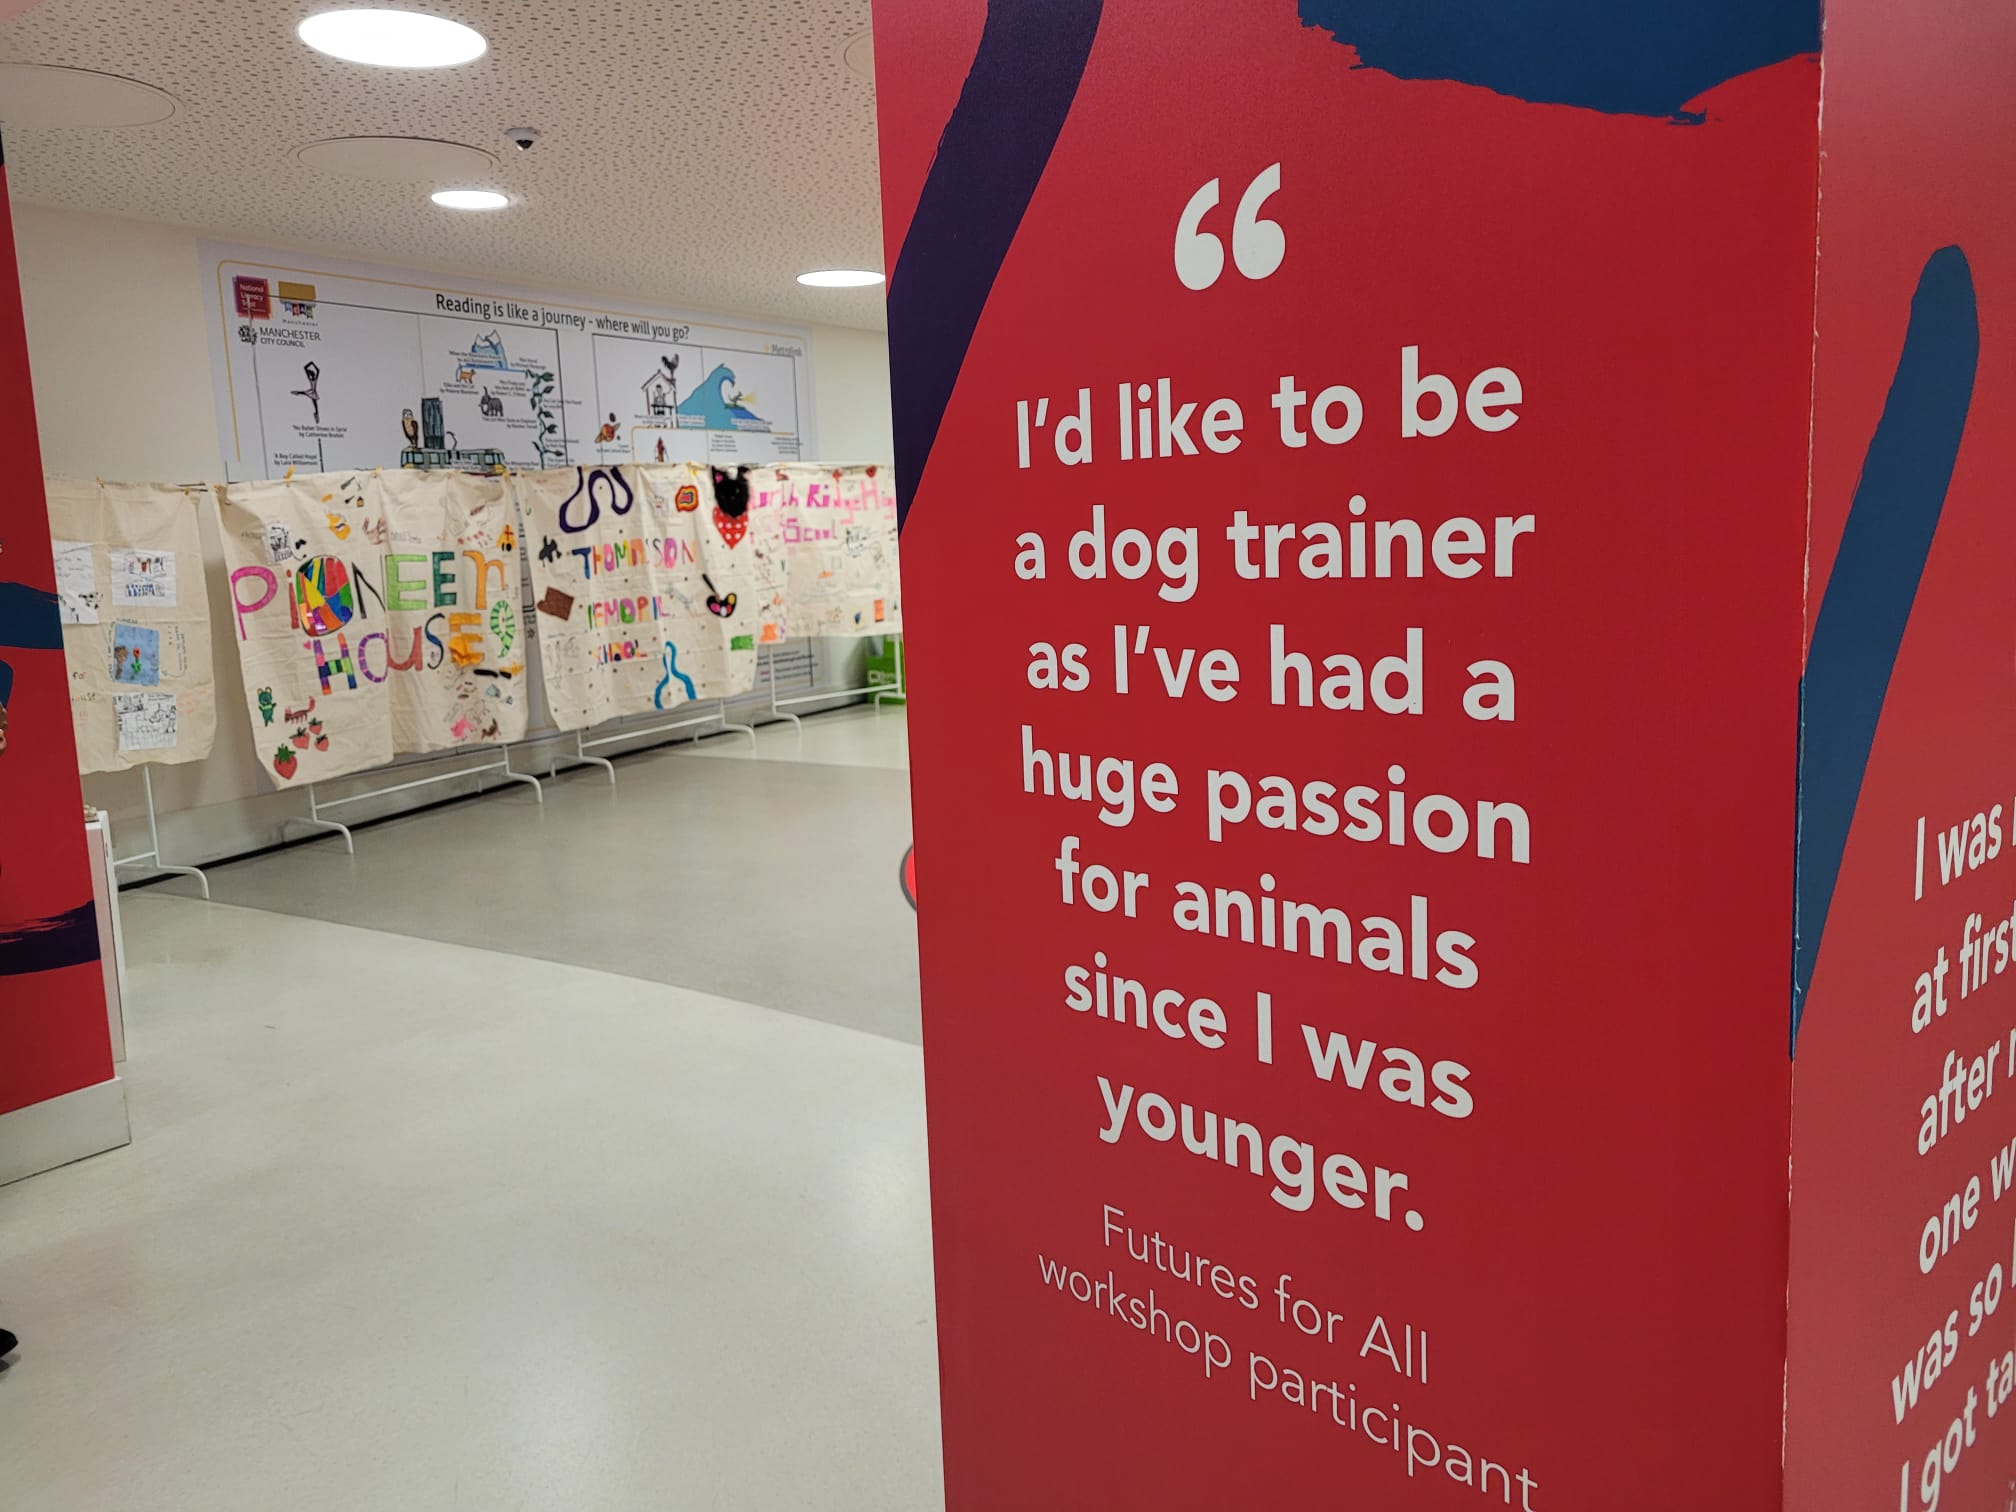 Mutiple textile panels displaying art from young people. In front of them a pillar with text that reads "I'd like to be a dog trainer as I've had a huge passion for animals since I was younger"